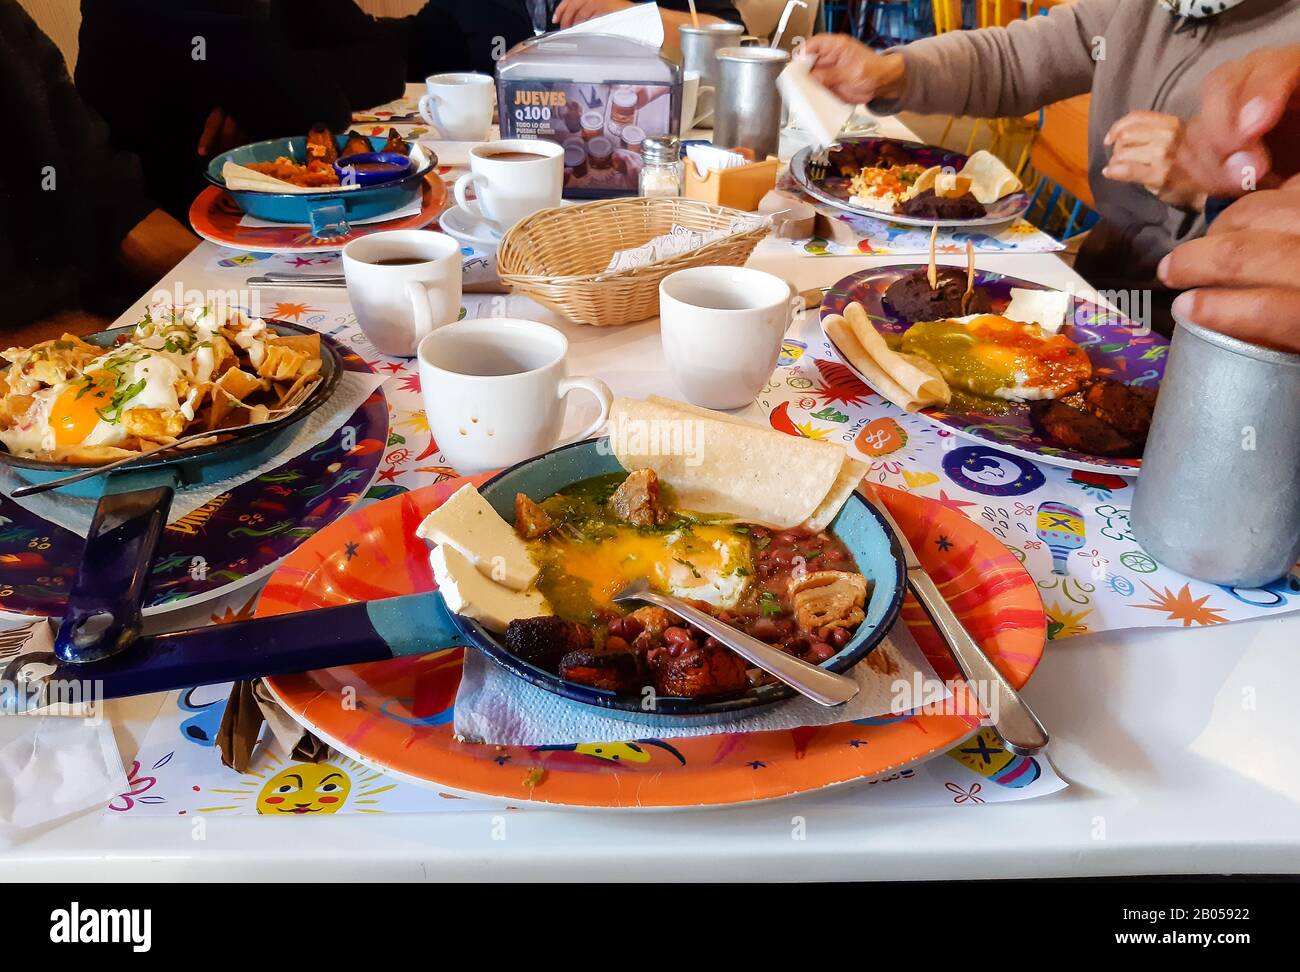 breakfast at a mexican restaurant Stock Photo